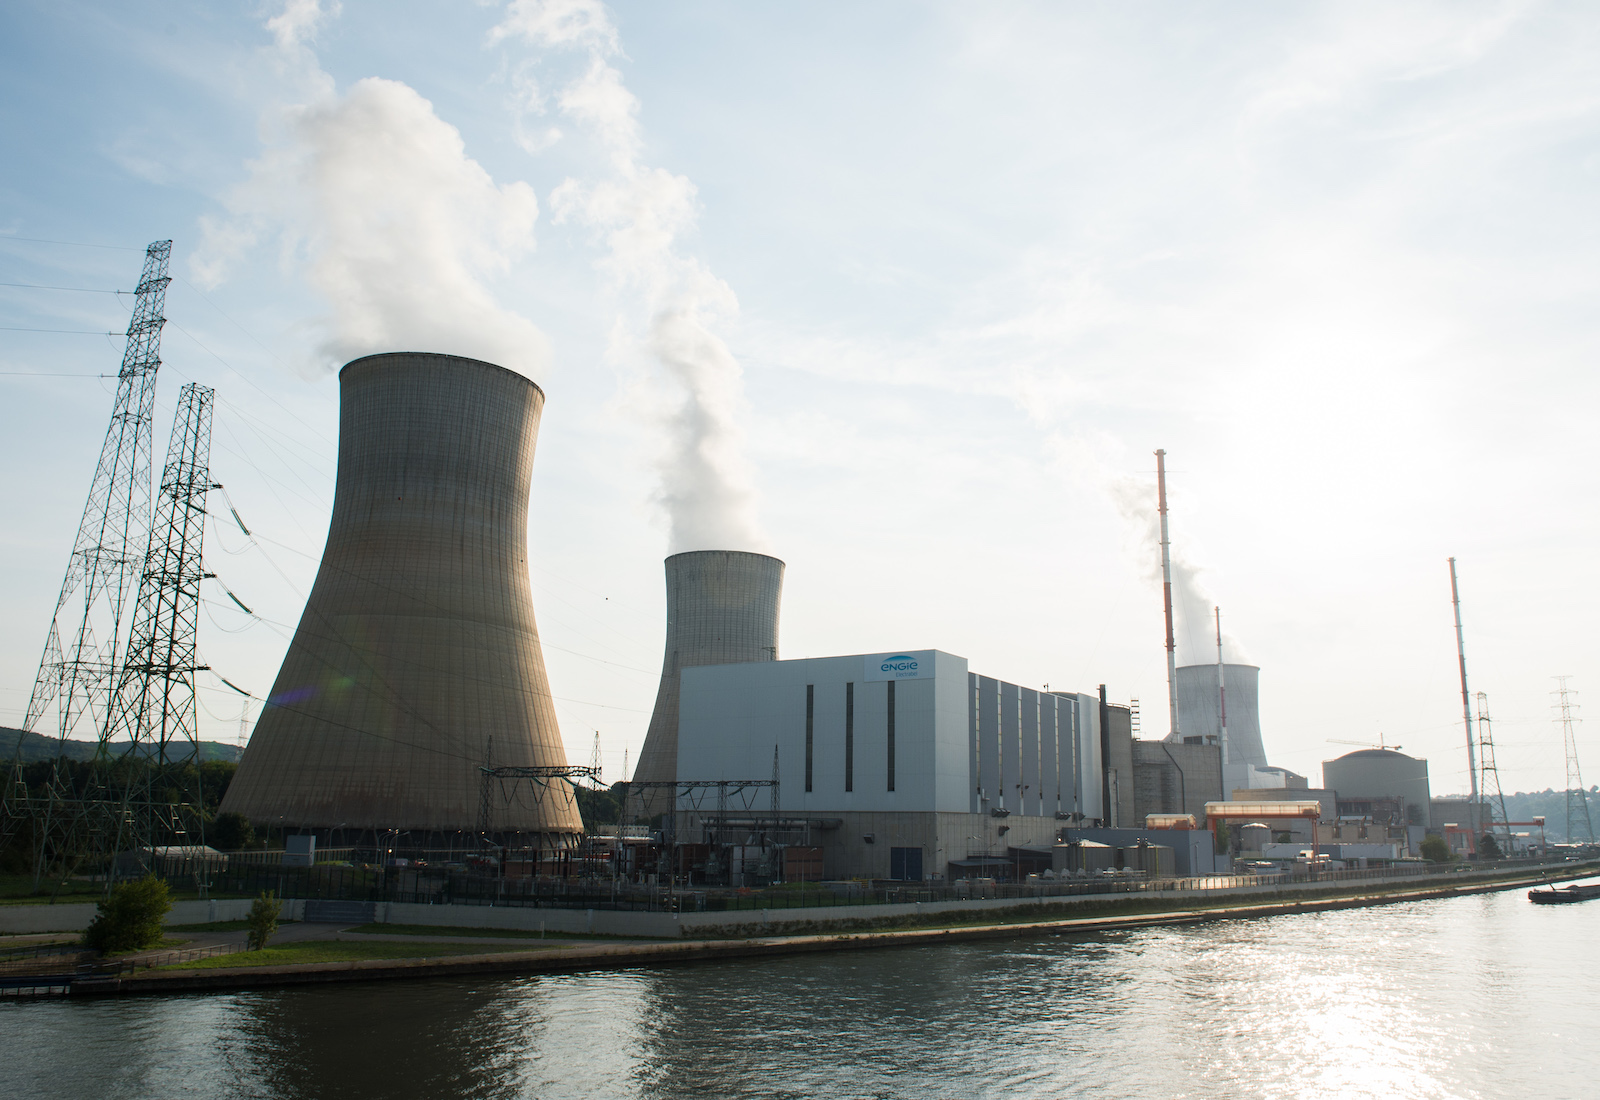 Three nuclear cooling towers on a river, with steam blowing from them